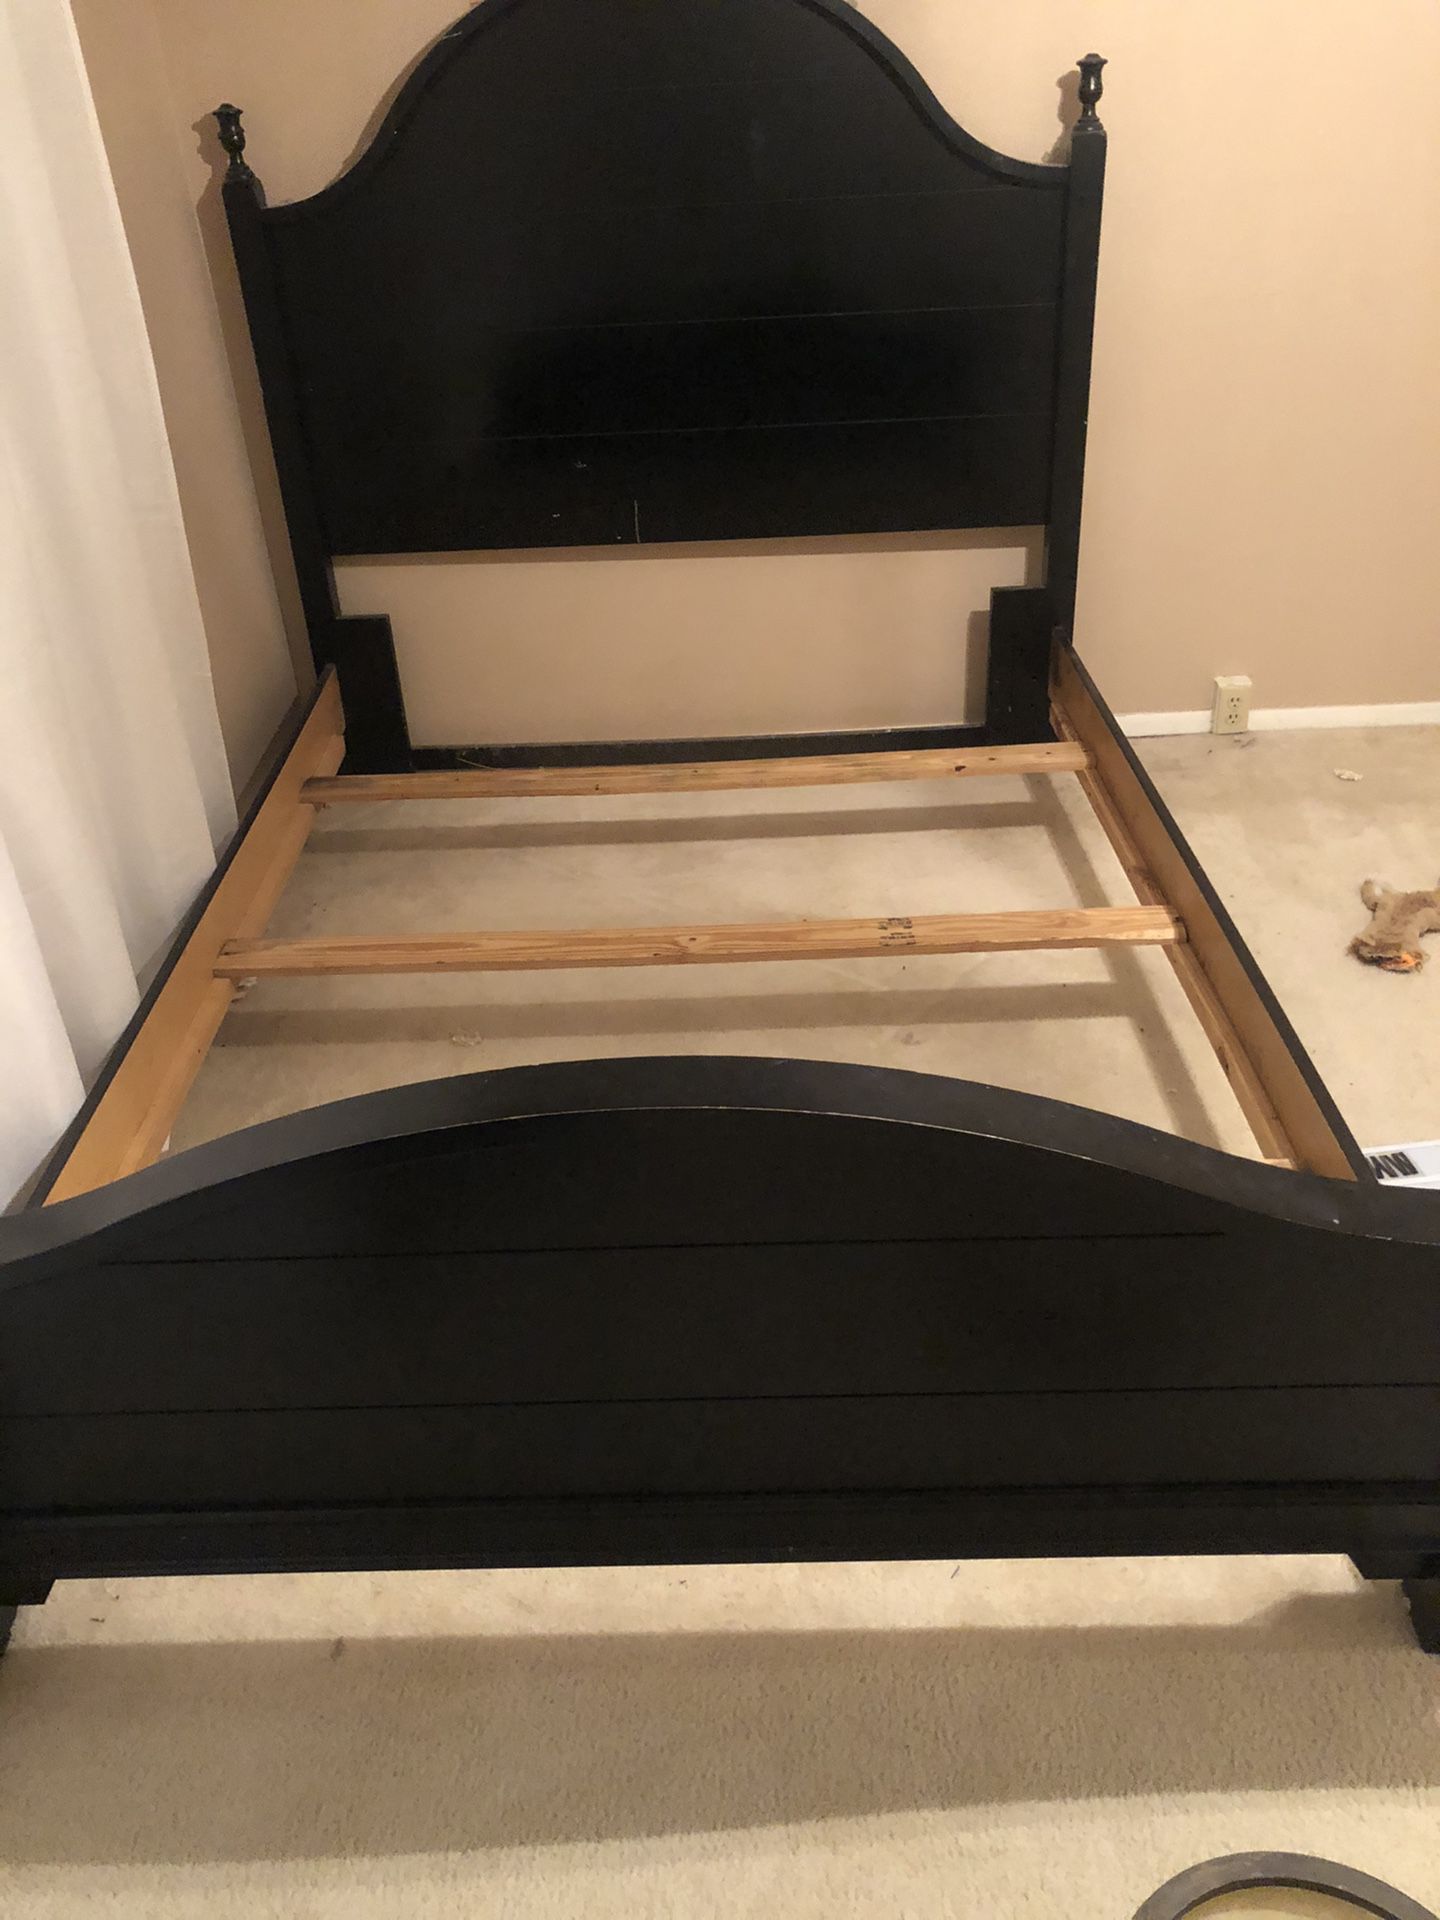 Black Queen size bed frame